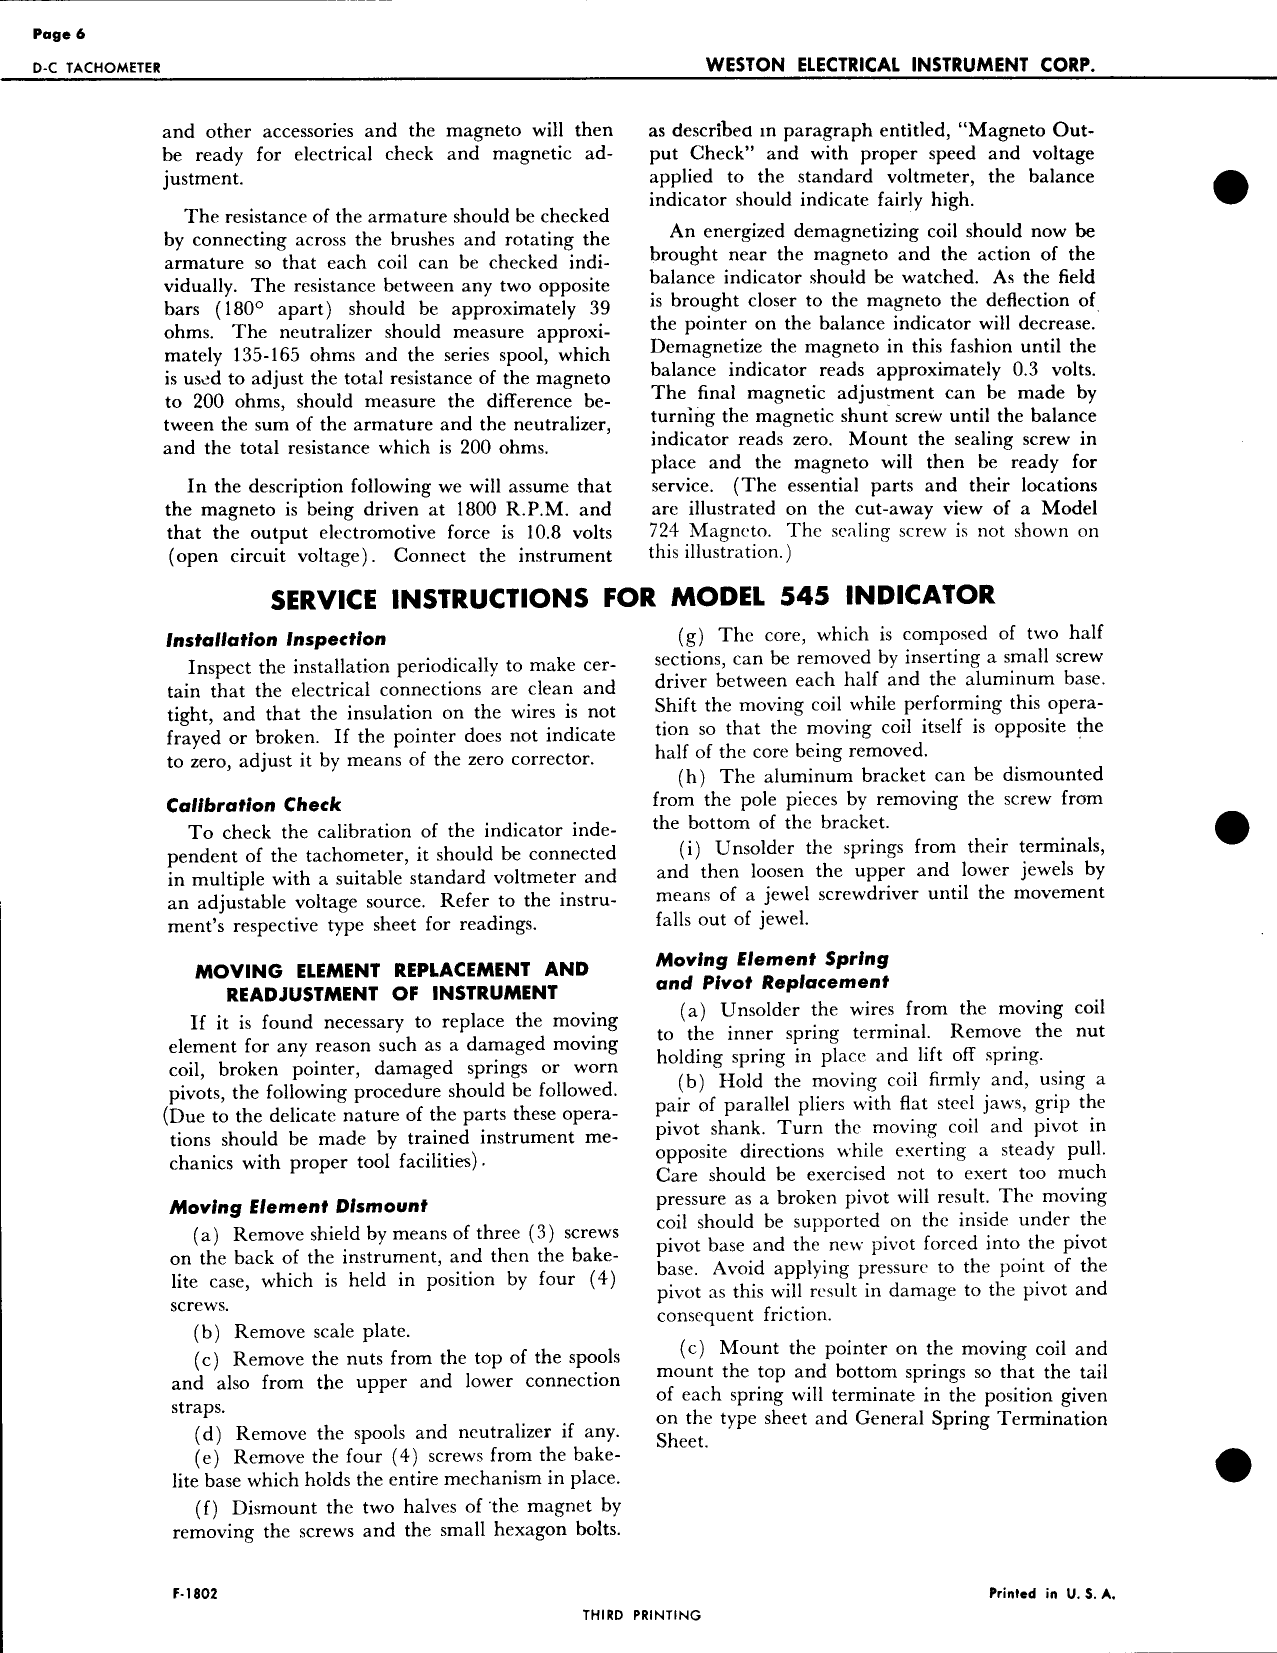 Sample page 6 from AirCorps Library document: Service Instructions for D-C Tachometer 724 Mag & 545 Indicator